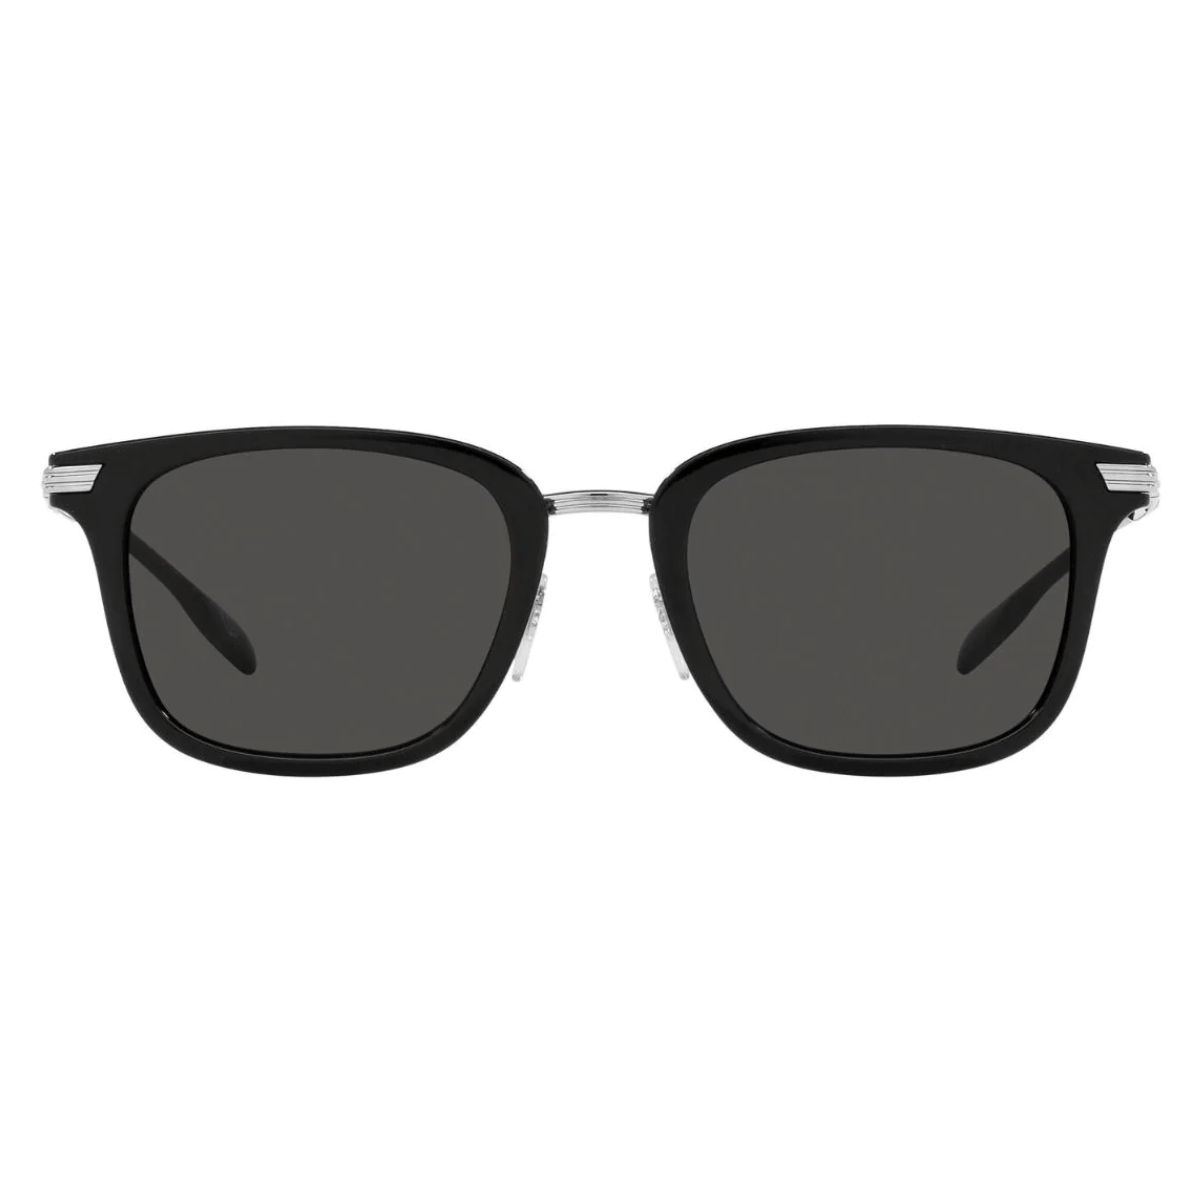 "Find the perfect pair of Burberry BE4329F 3002/83 55-22-145 sunglasses at Optorium: Non-polarized and stylish, they're the ideal choice for men looking for top-quality shades."